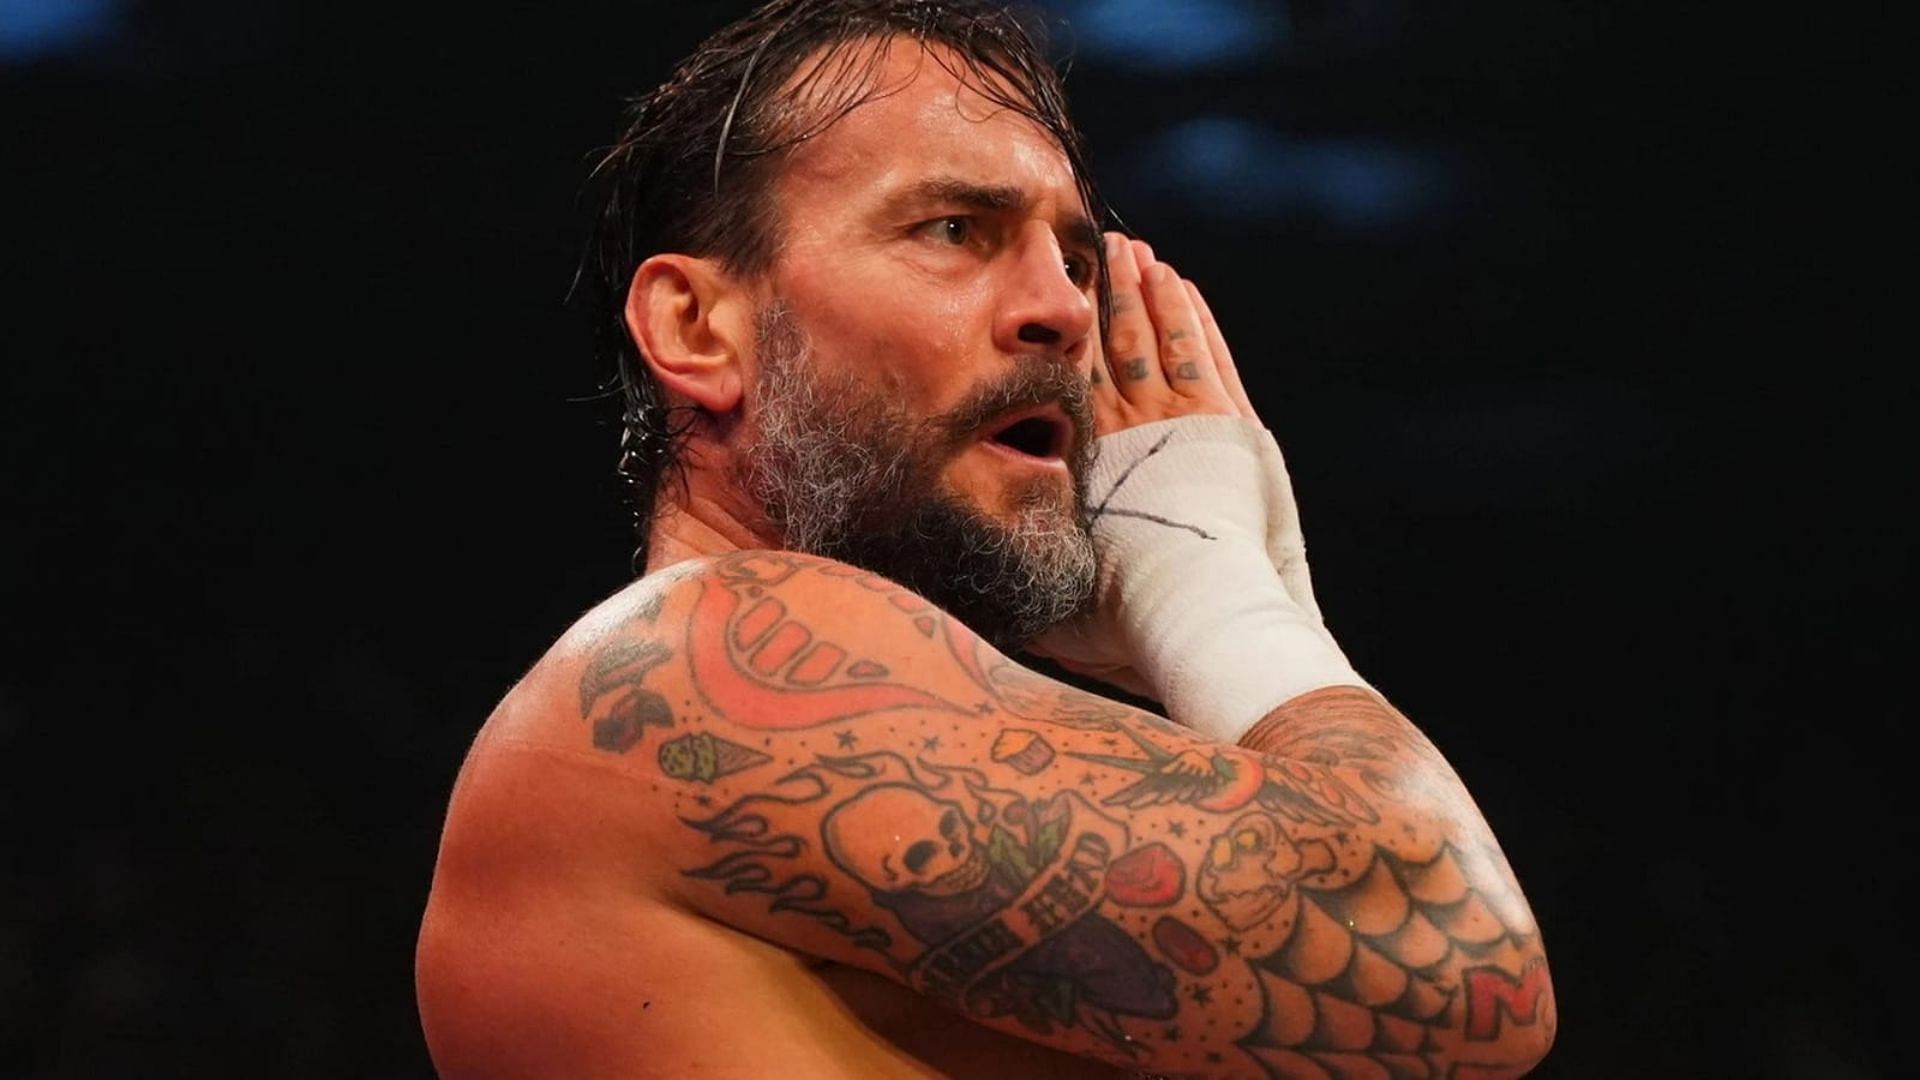 There has been another update on CM Punk and AEW Collision